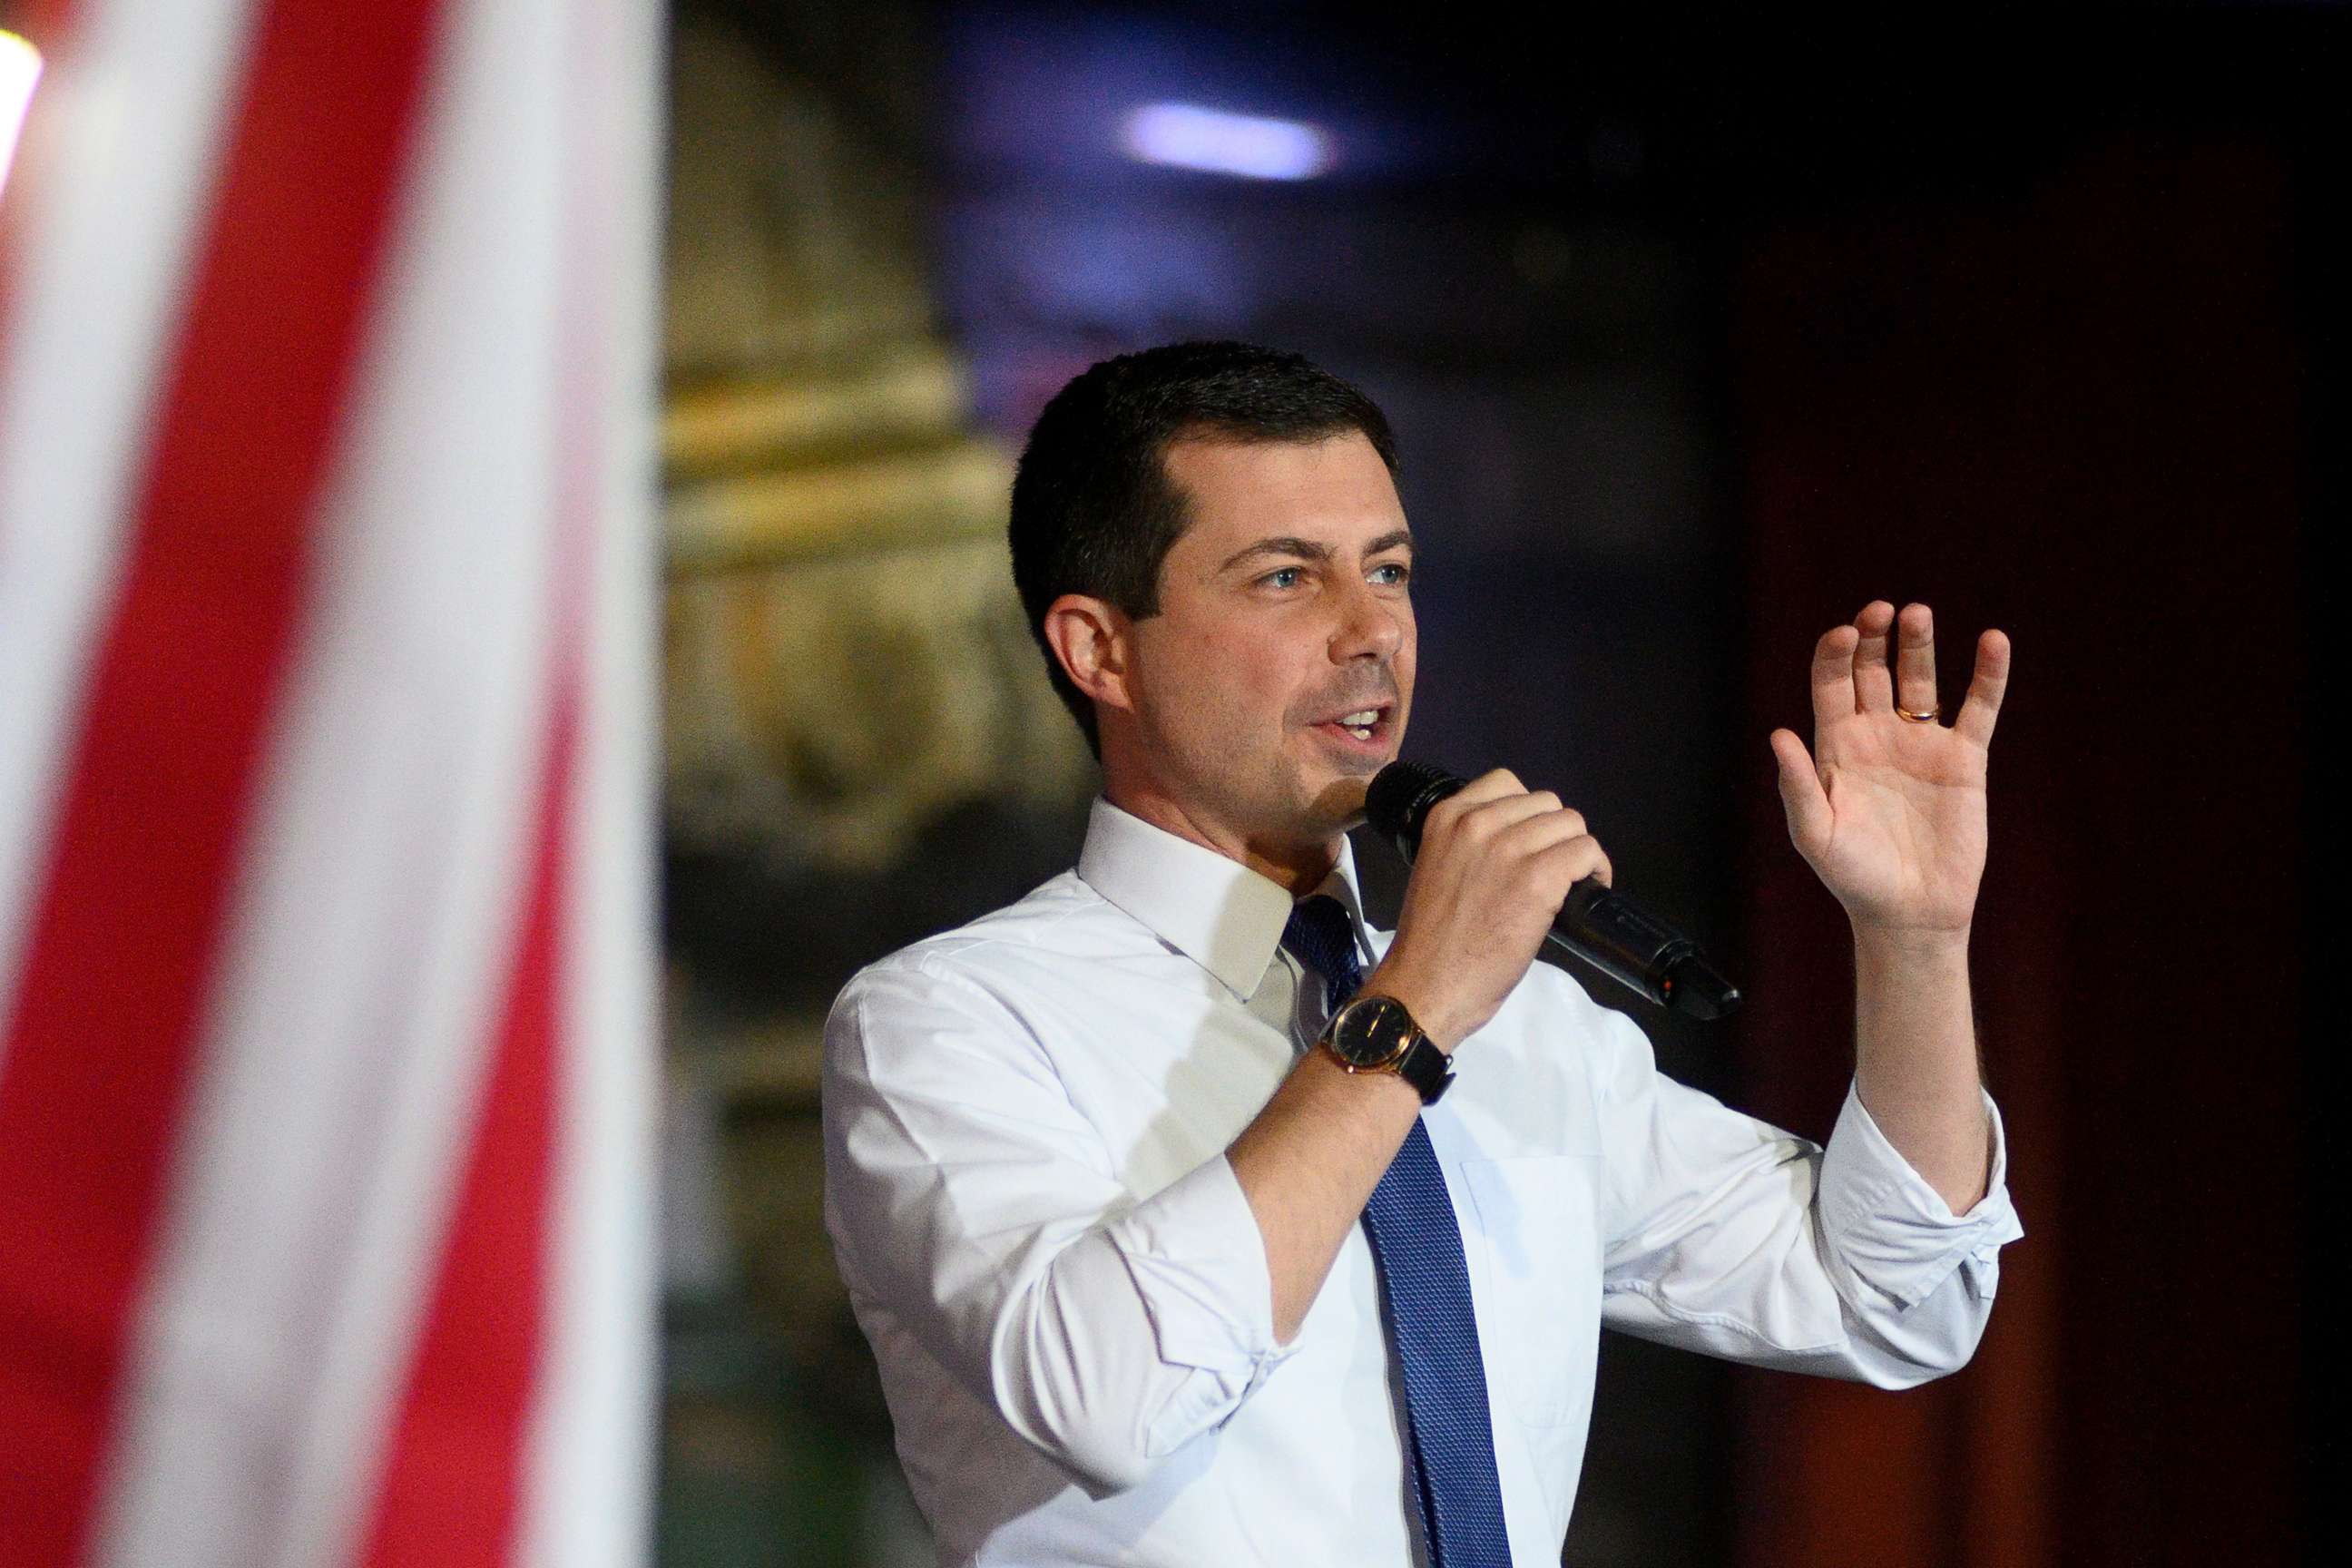 PHOTO: Democratic presidential hopeful South Bend, Indiana Mayor Pete Buttigieg speaks on the stage during a campaign rally outside the Reading Terminal Market in Center City Philadelphia, PA, on Oct. 20, 2019.